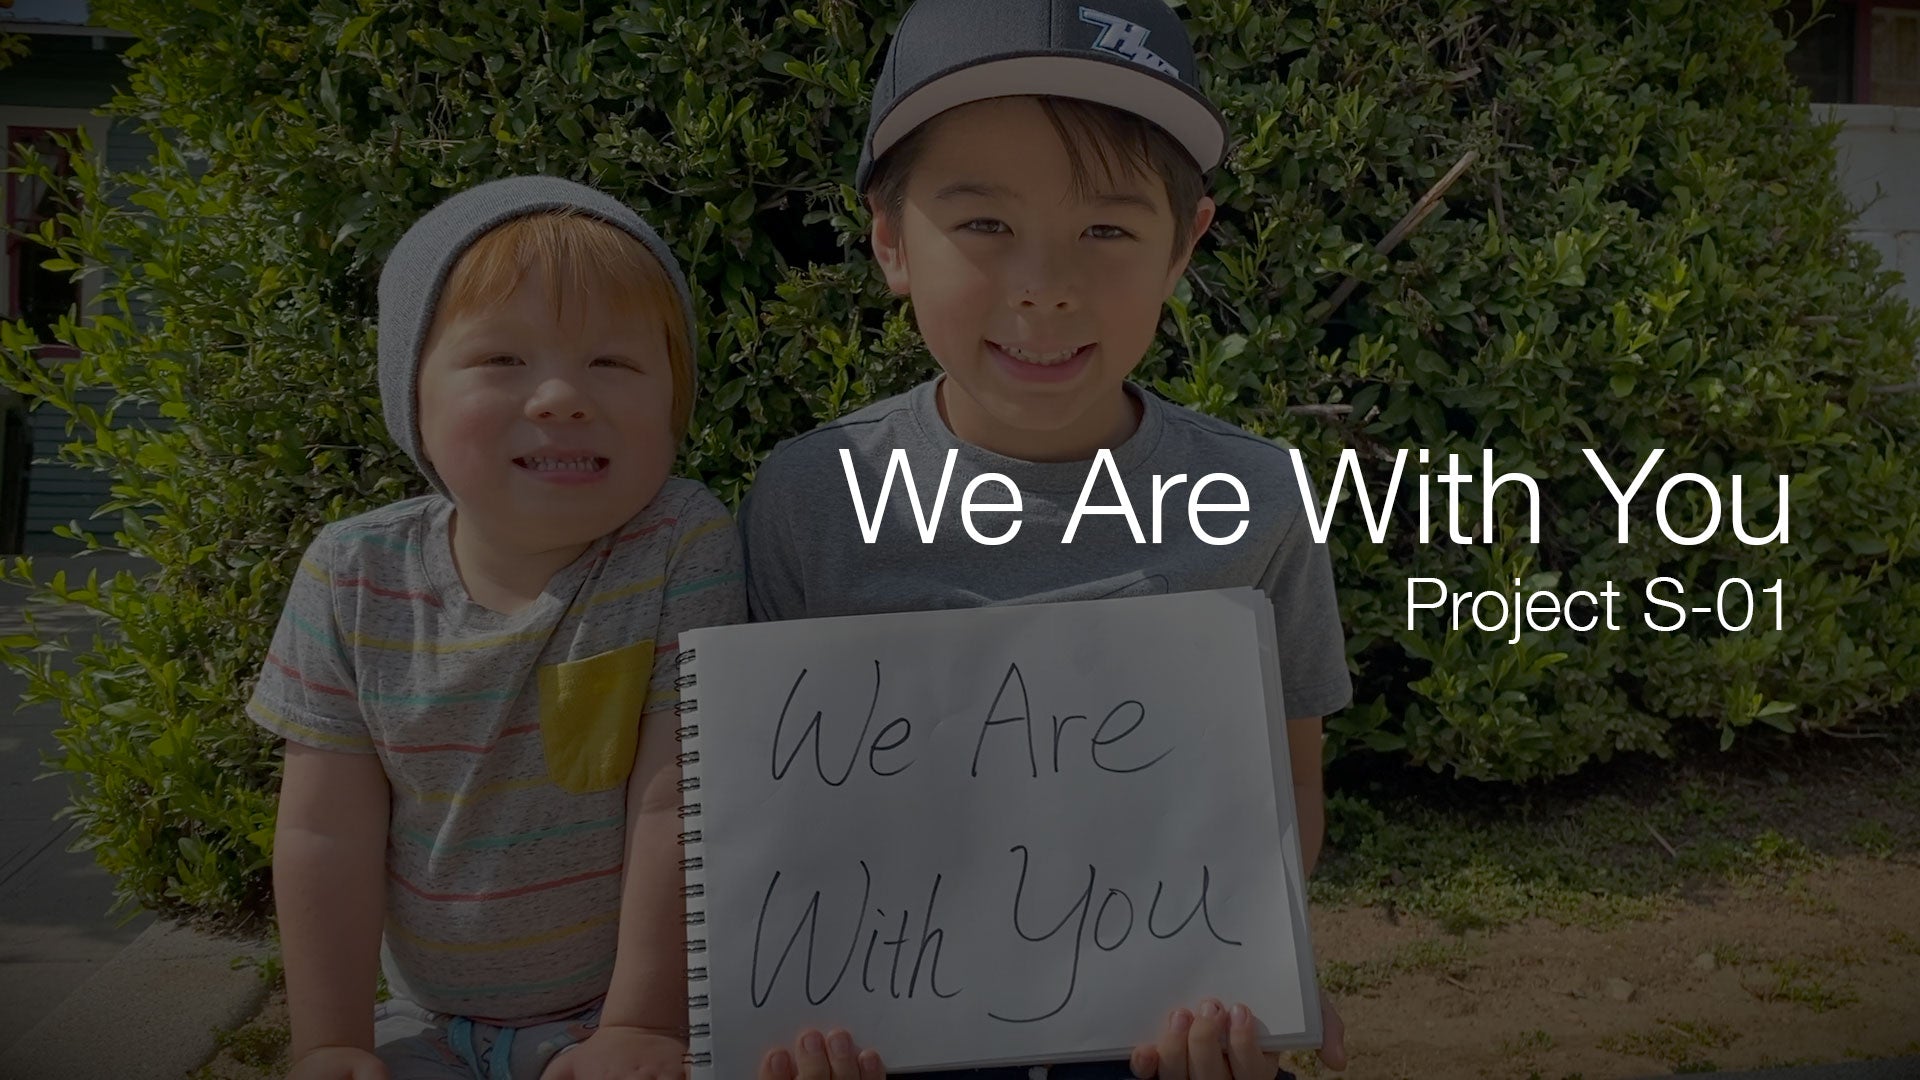 #WeAreWithYou Project